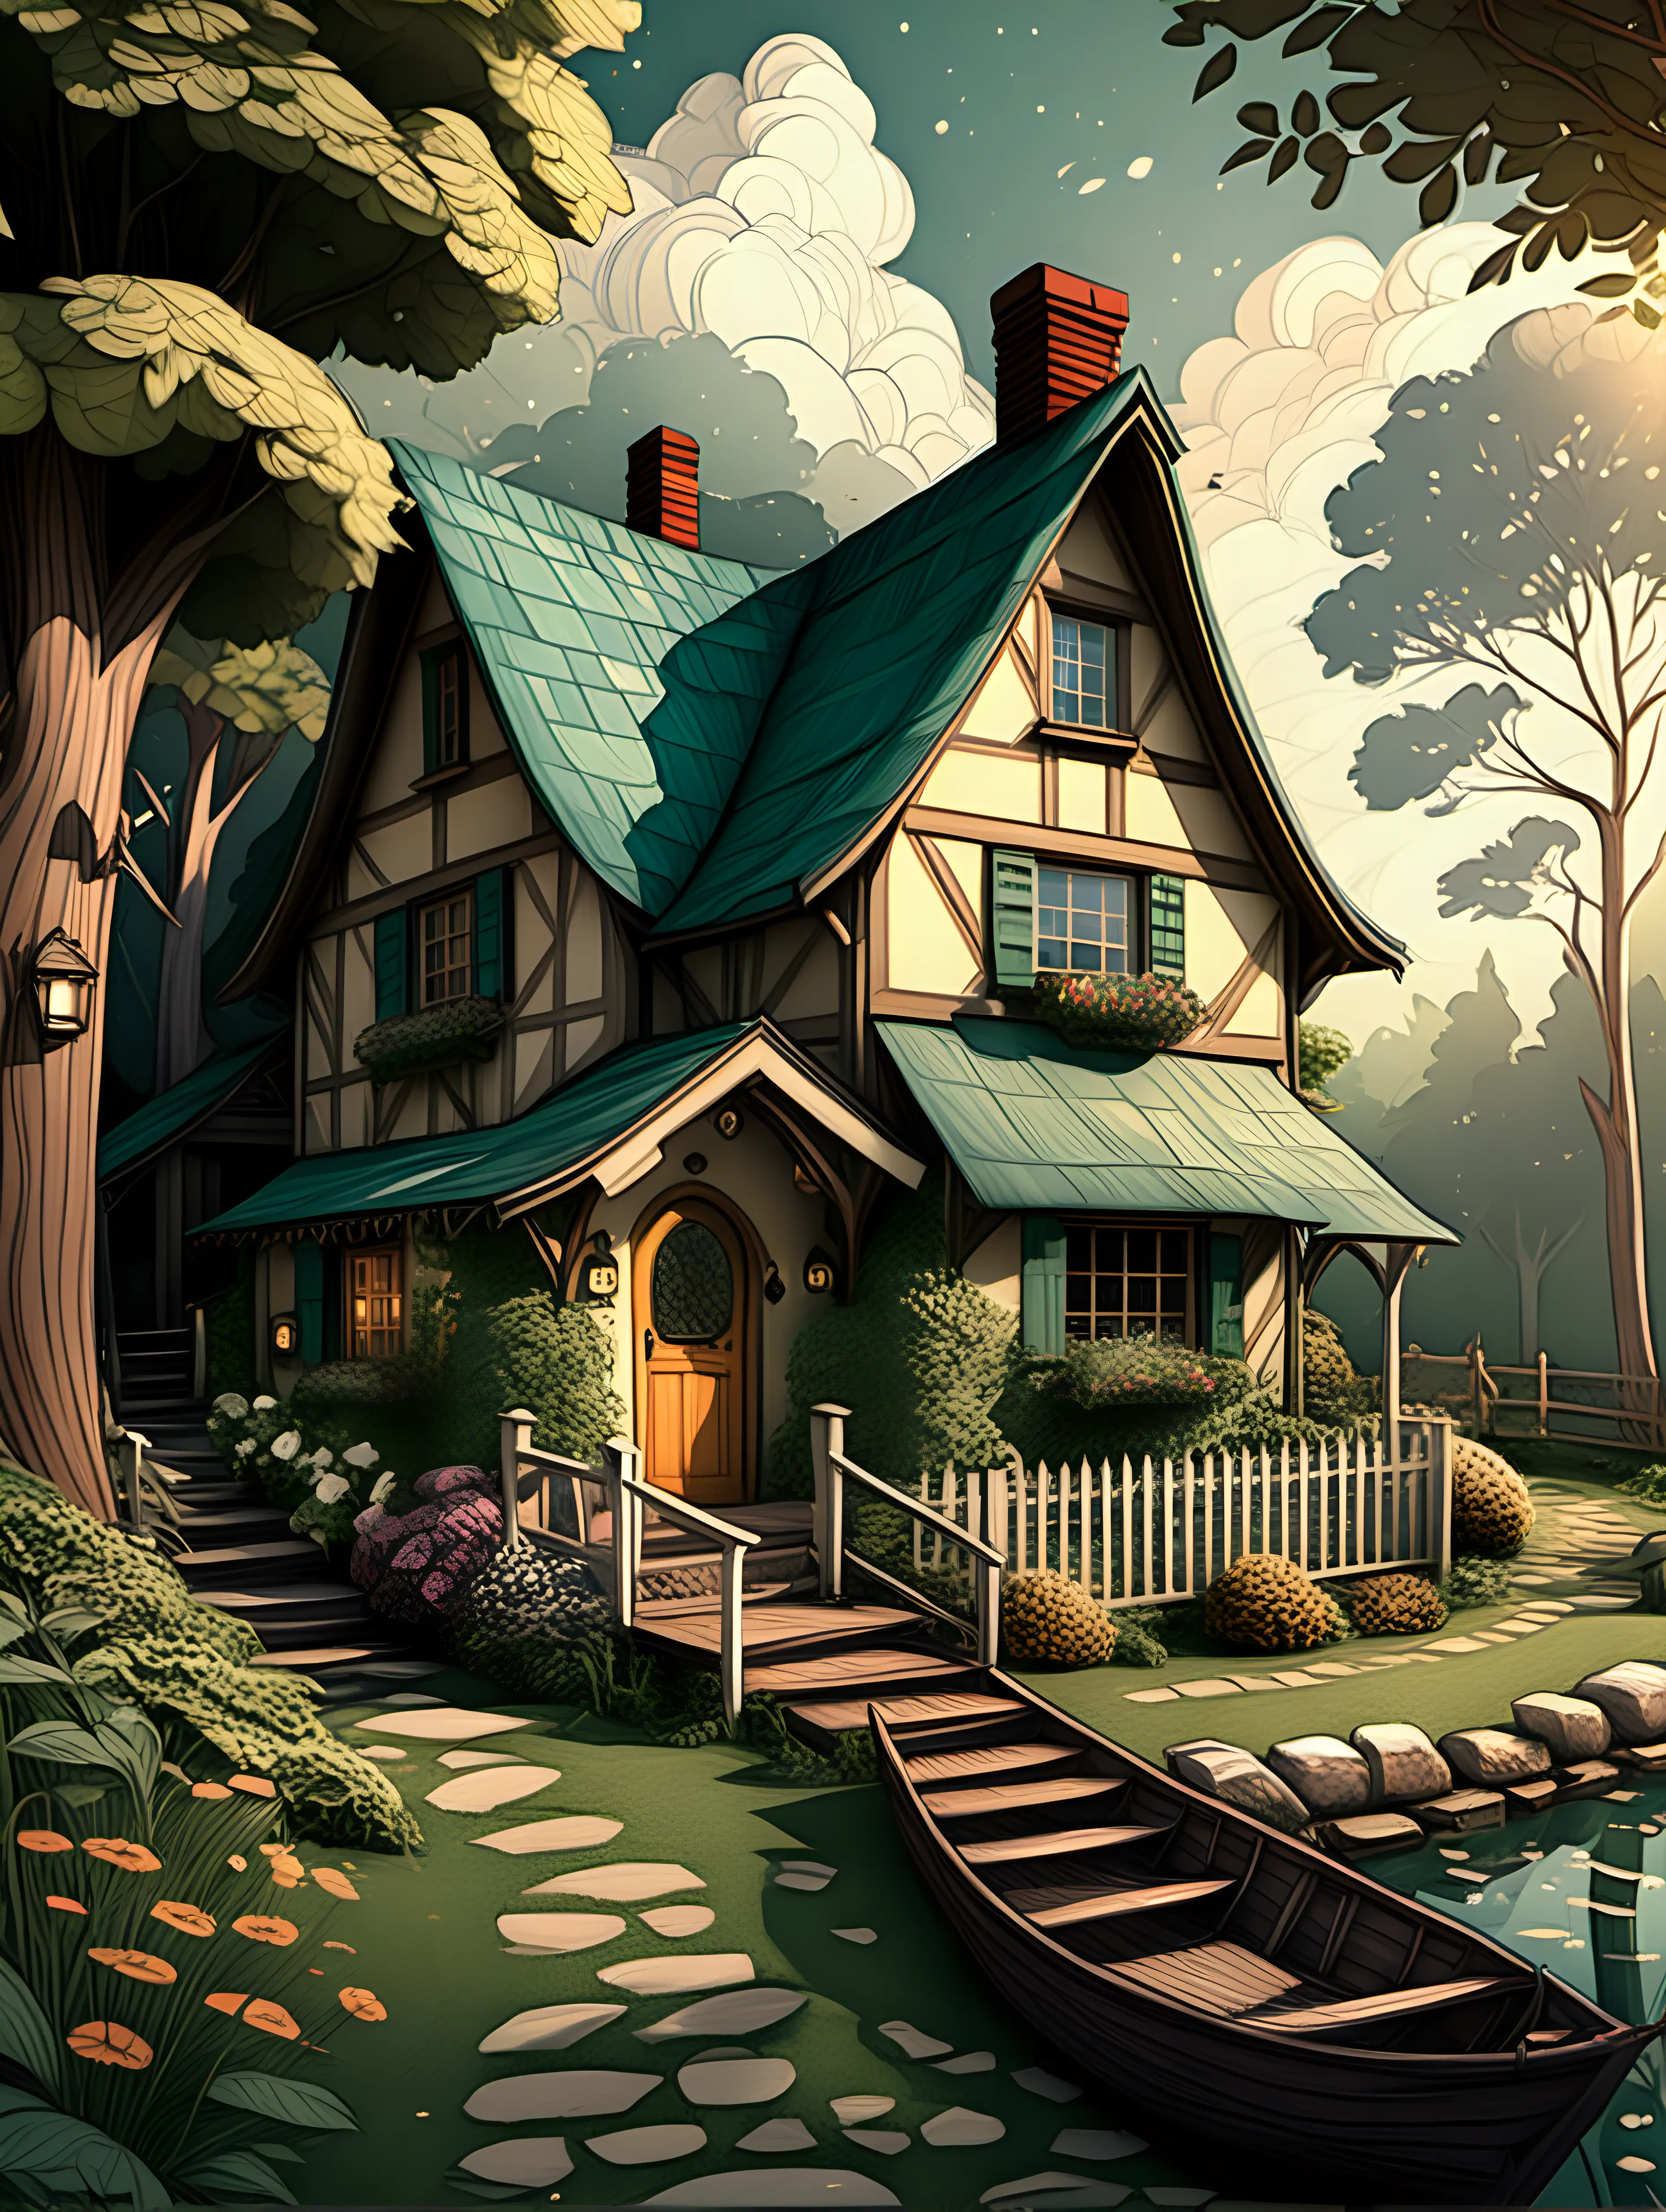 /imagine
illustration, storybook cottage, thick lines, high detail, realistic color